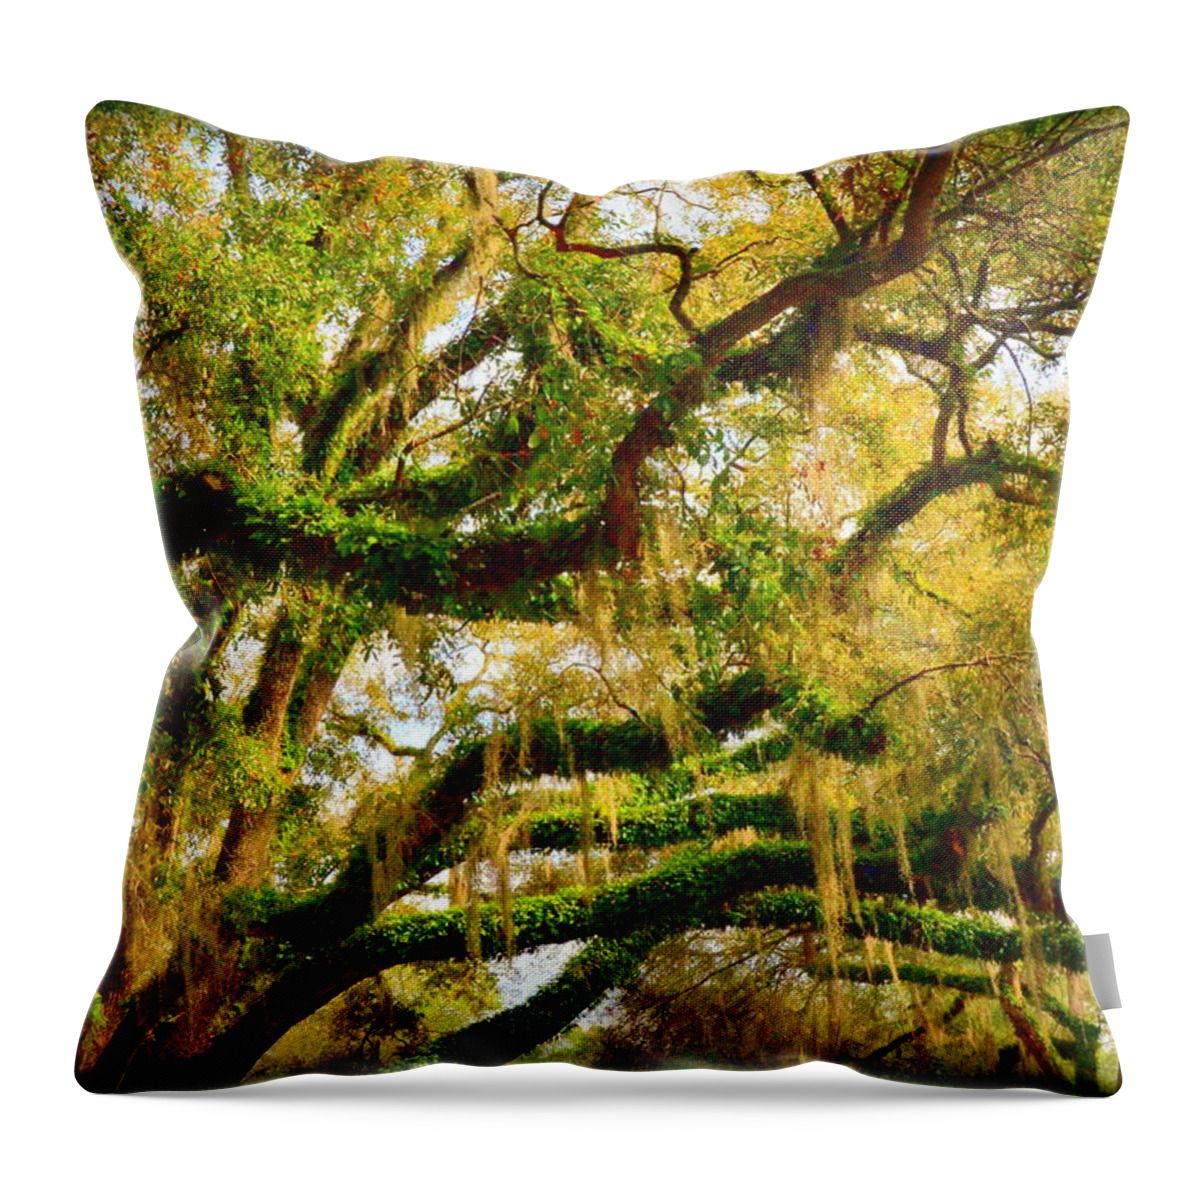 Resurrection Throw Pillow featuring the photograph Resurrection Fern by Carla Parris